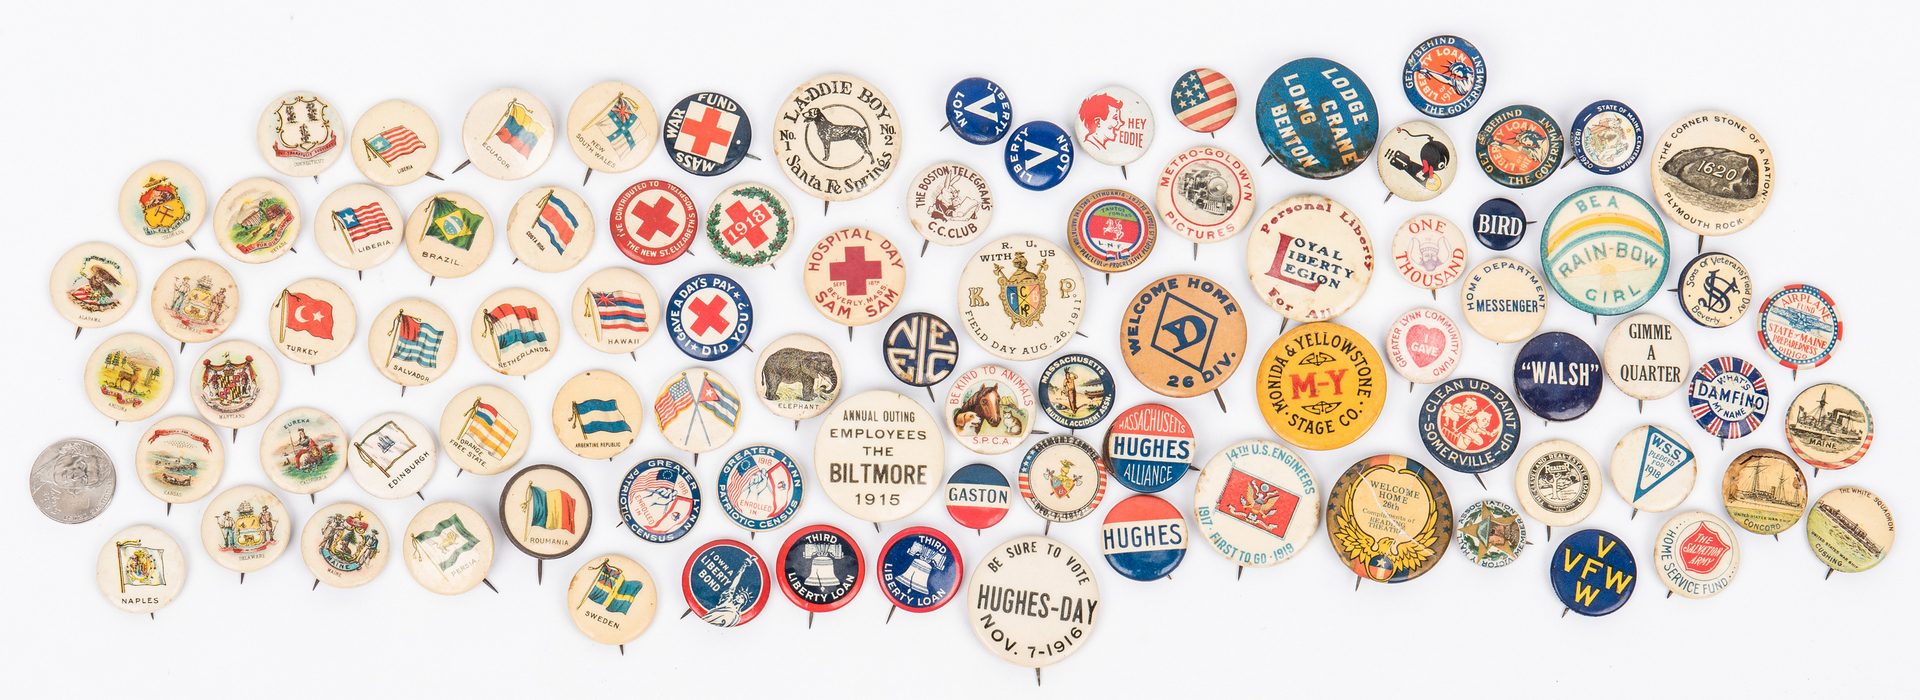 Lot 412: 88 Early Pinback Buttons, incl. Political, Cigarette, WWI, etc.